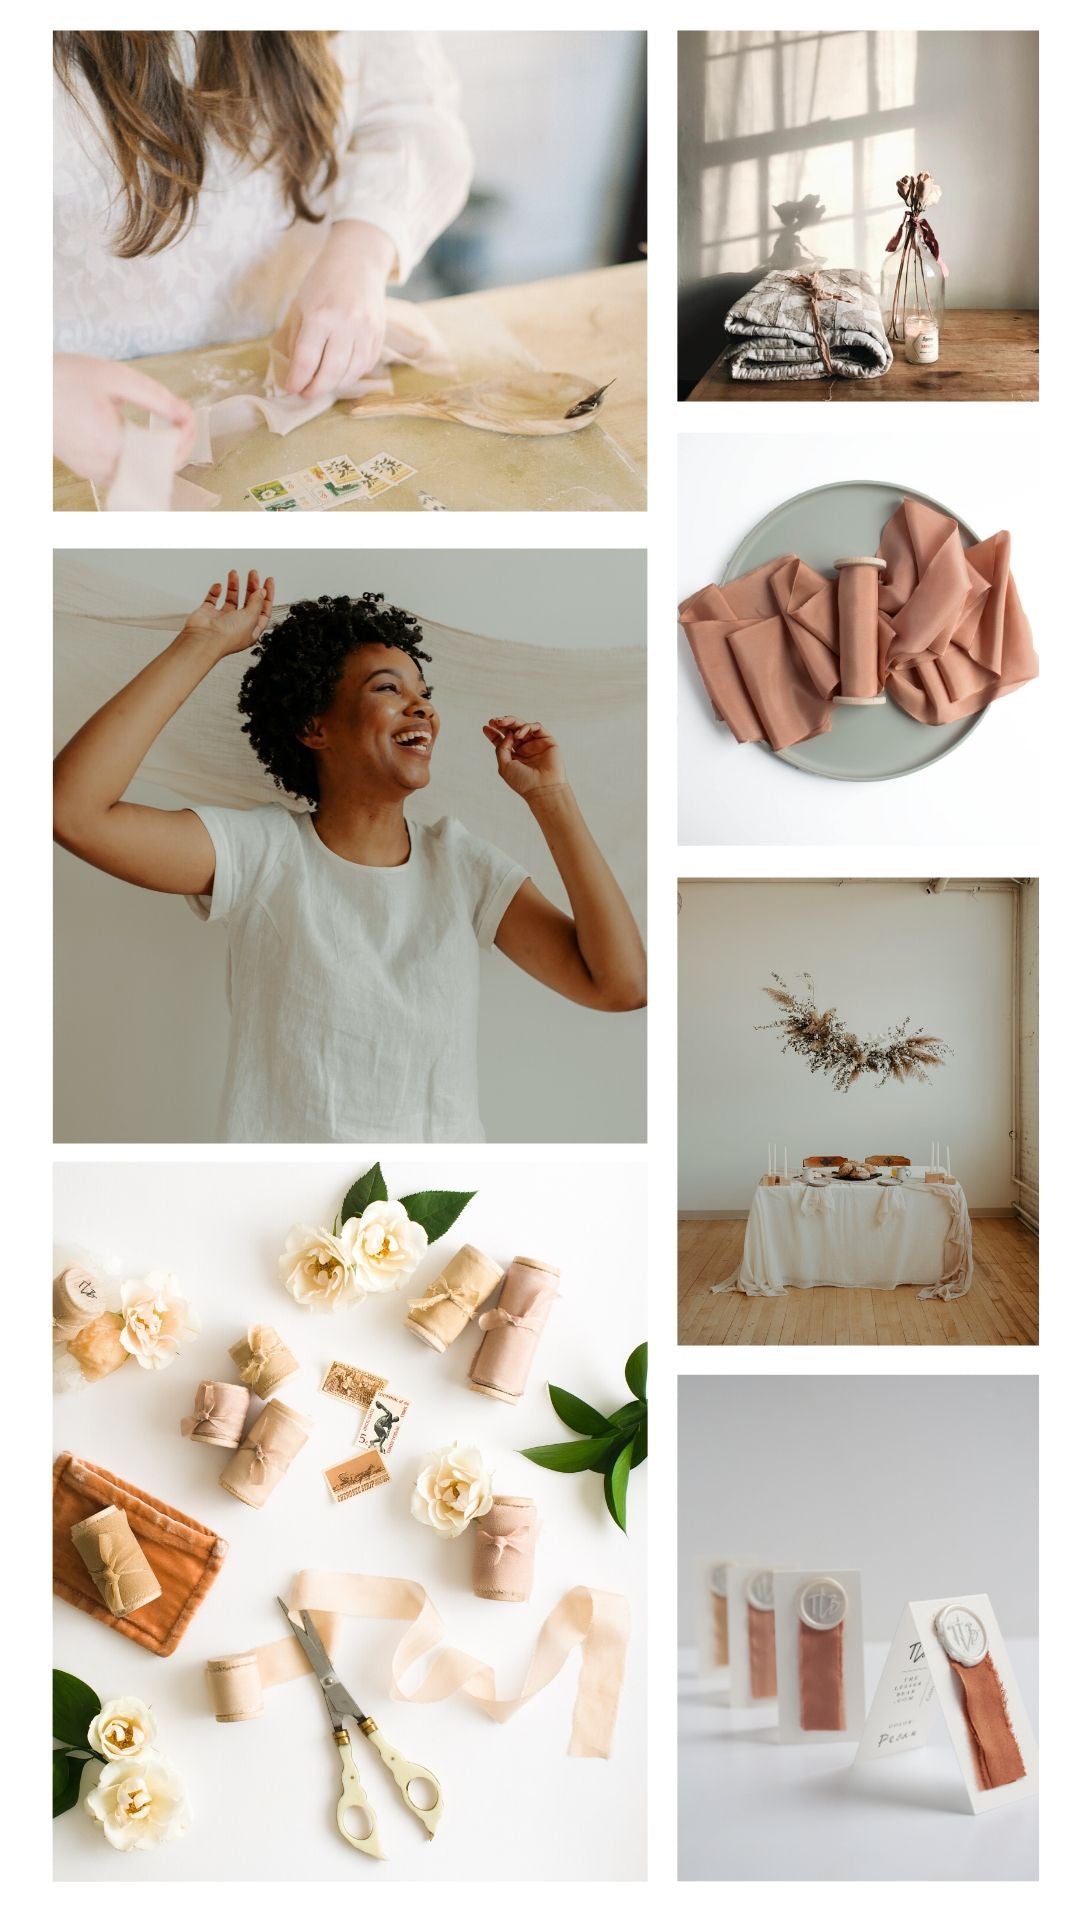 Last Week on Instagram: Warm whites and neutrals in weddings and interiors - The Lesser Bear